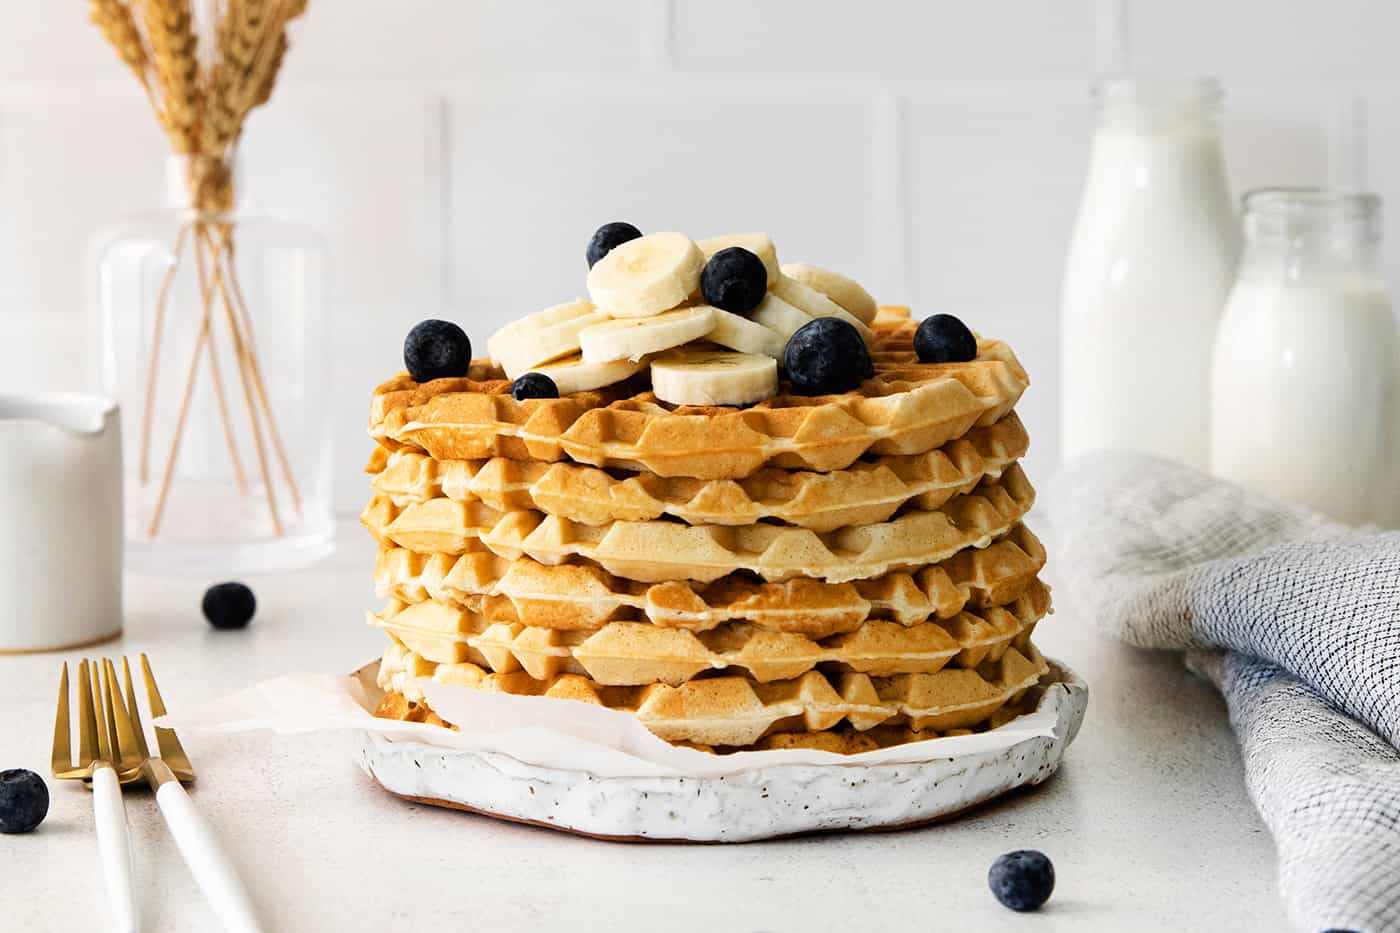 A stack of homemade waffles topped with blueberries and bananas